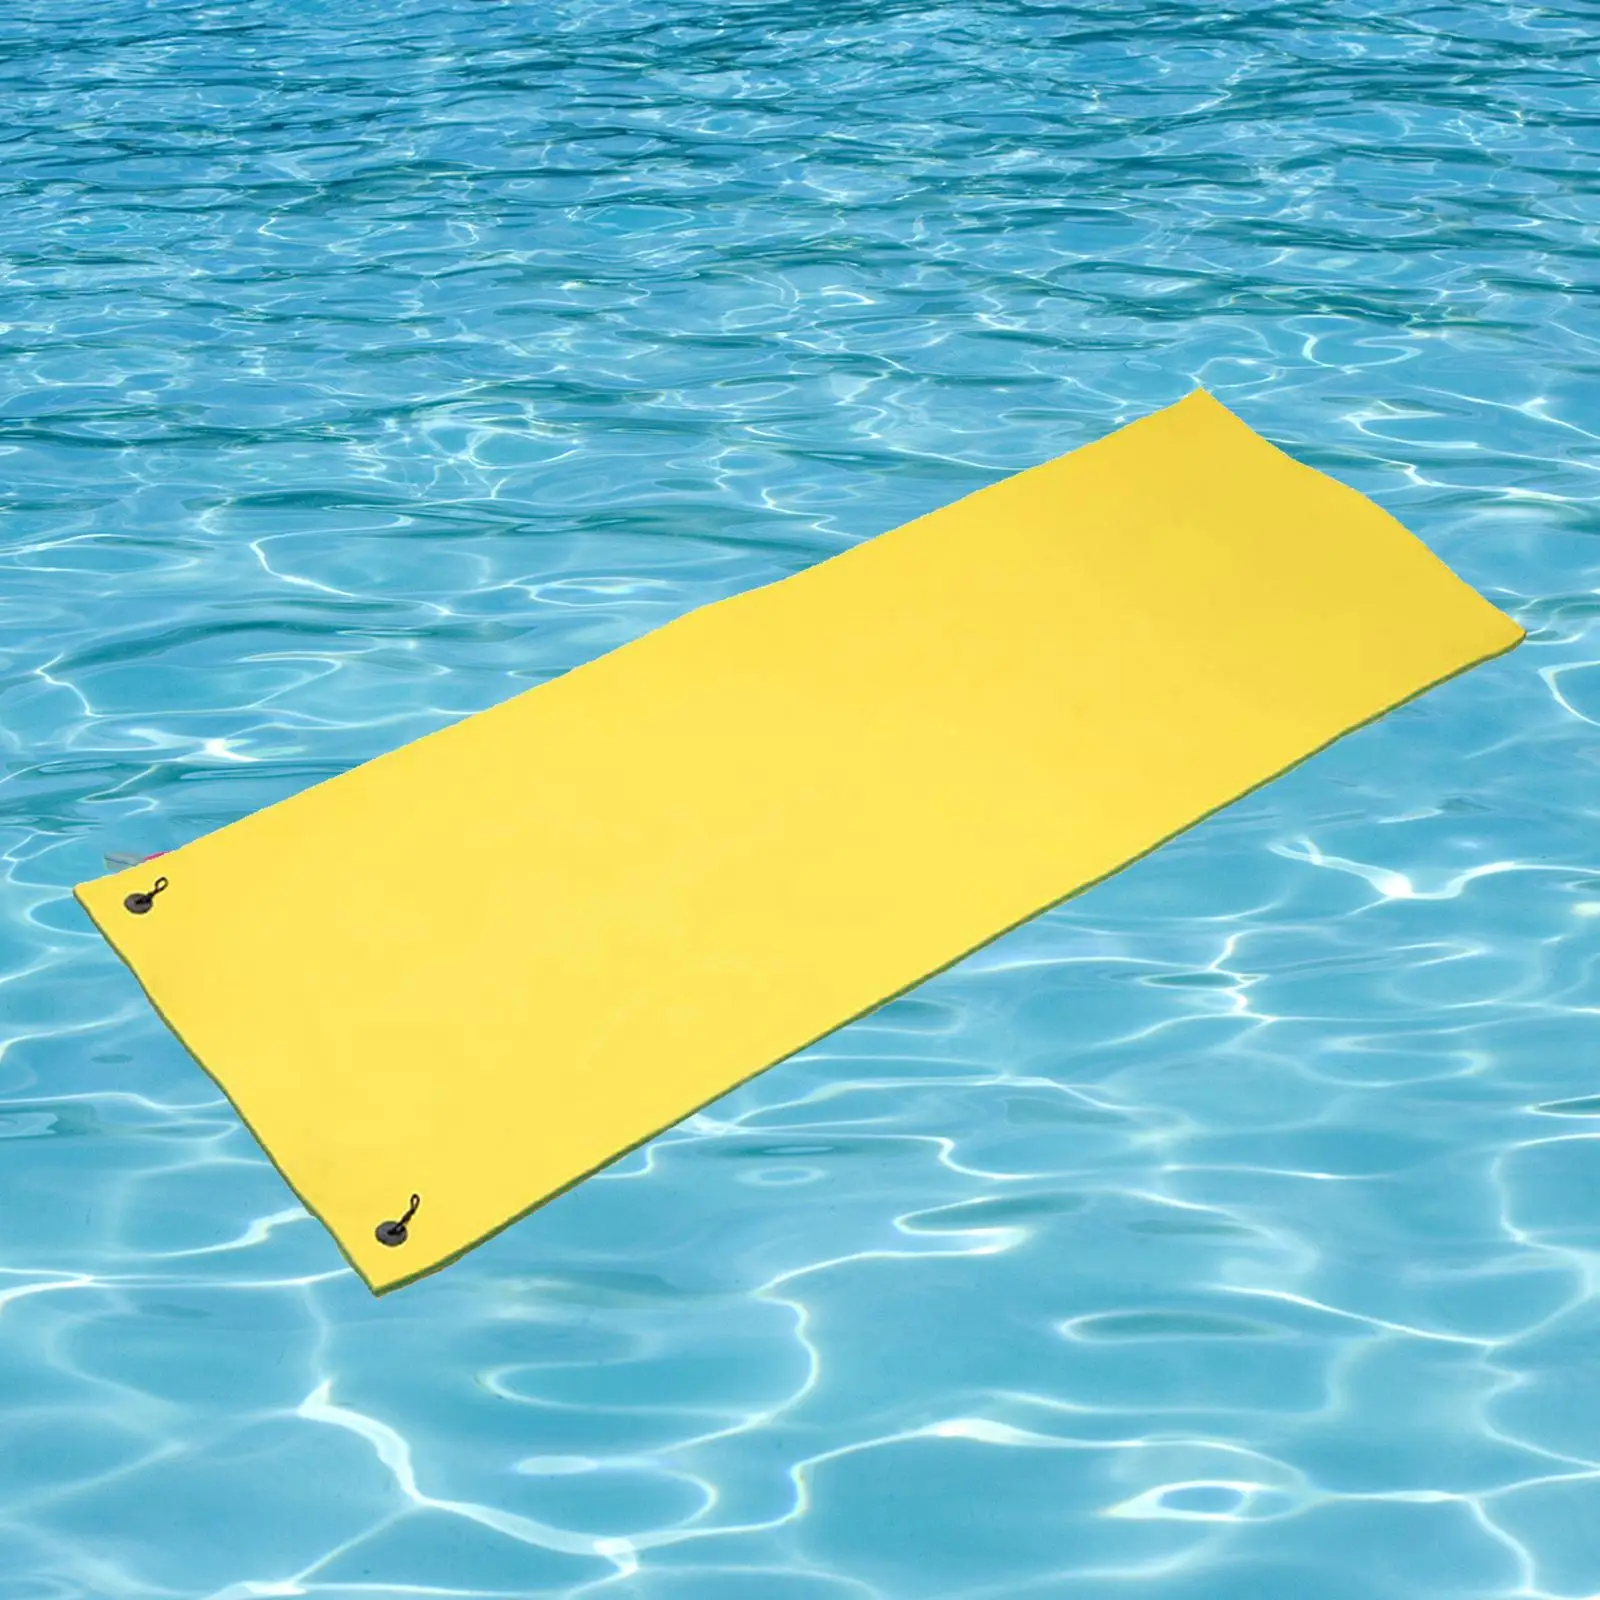 Pool Water Floating Mat 3 Layer Water Raft 270x90x3.3cm Simple to Clean with Soap and Water for Relaxing Portable Water Bed